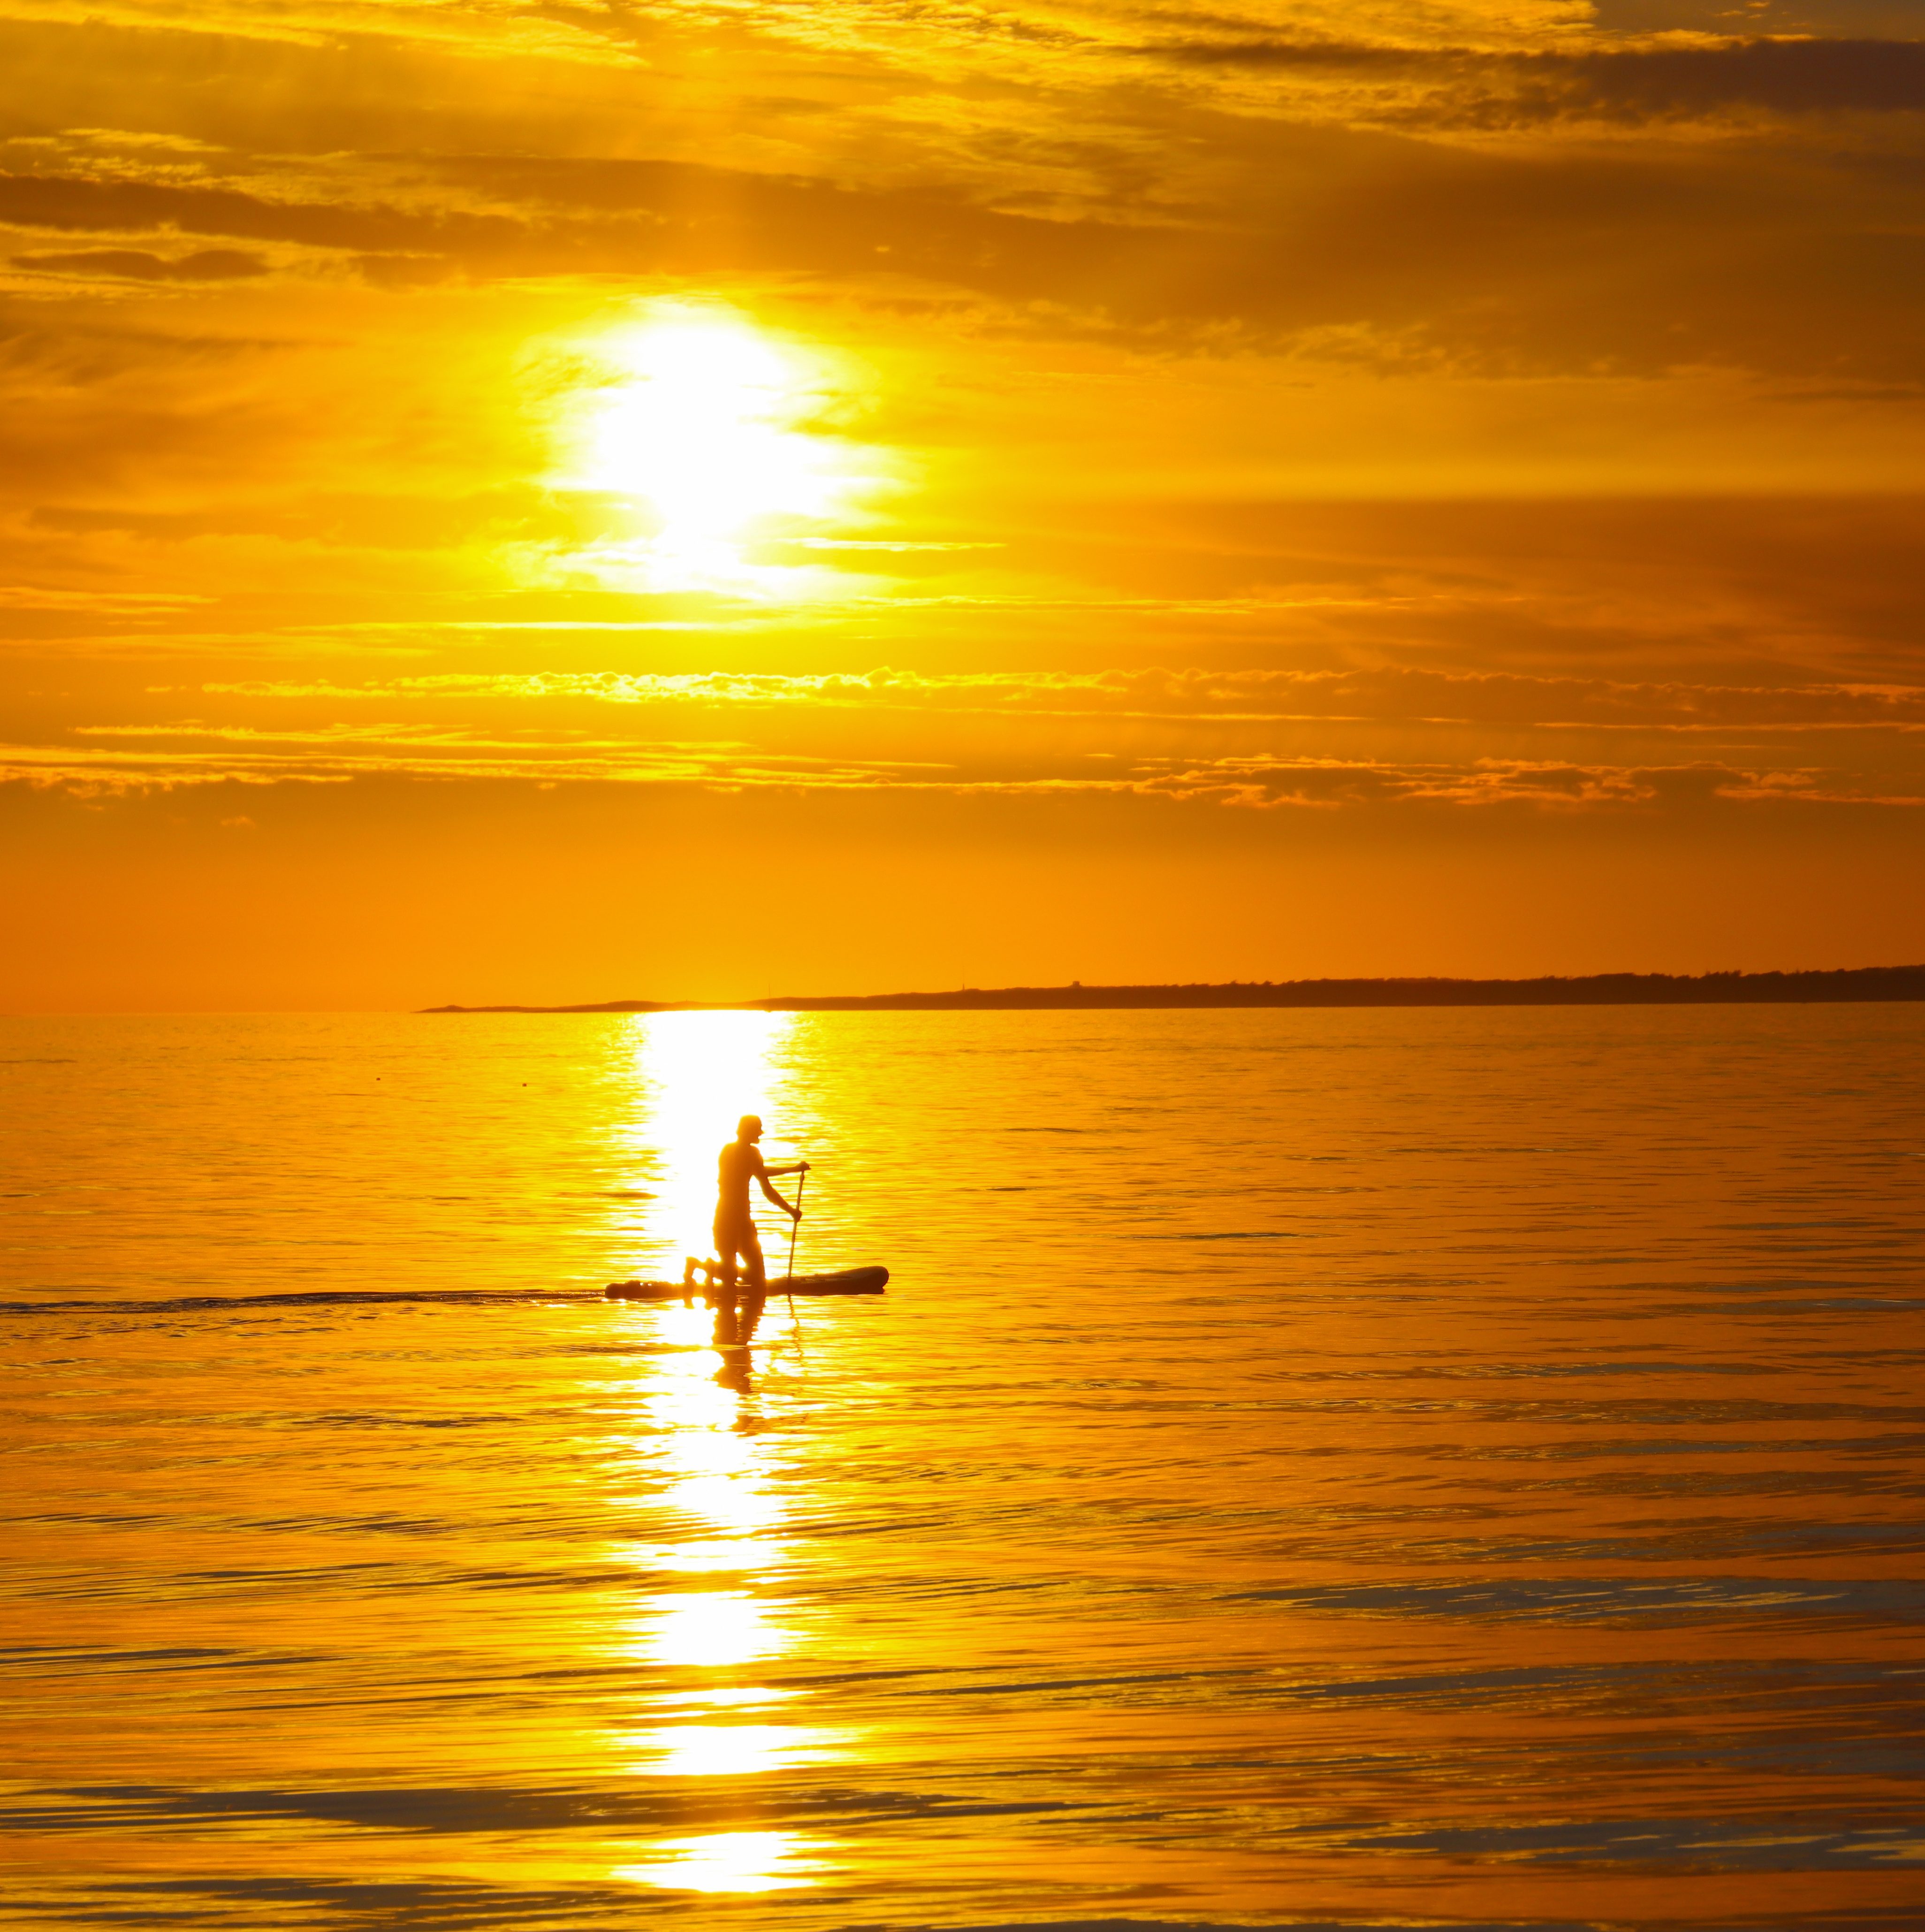 The sun setting over a paddle-boarding individual, who is floating on the sea.